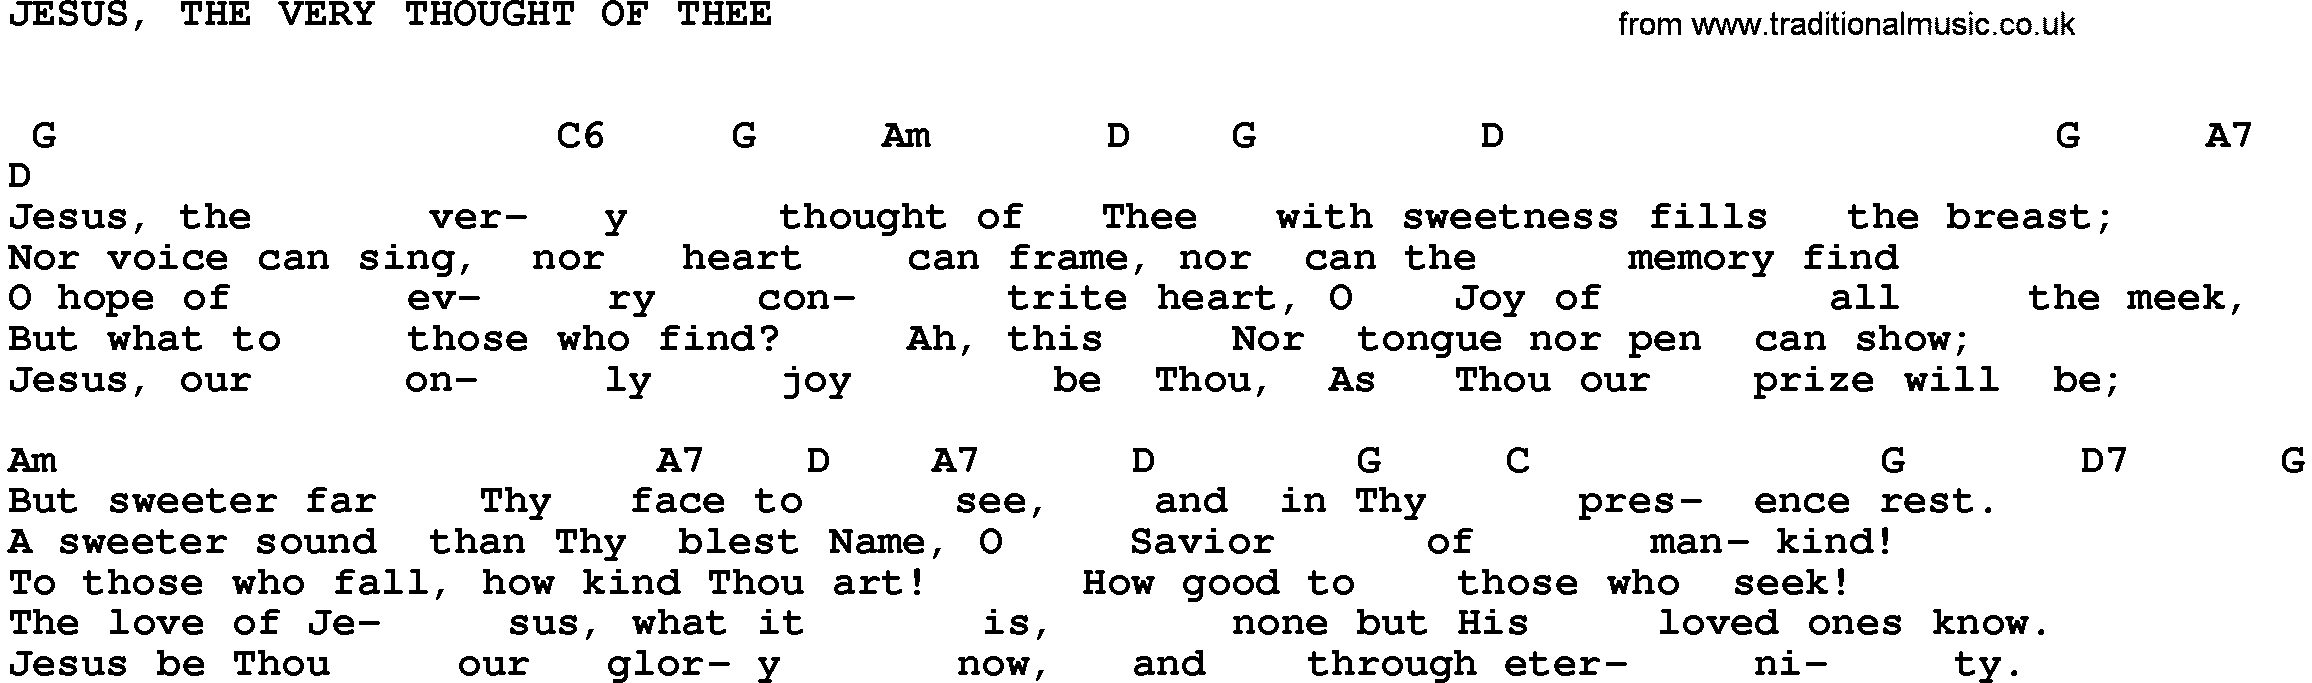 Gospel Song: Jesus The Very Thought Of Thee-Trad, lyrics and chords.